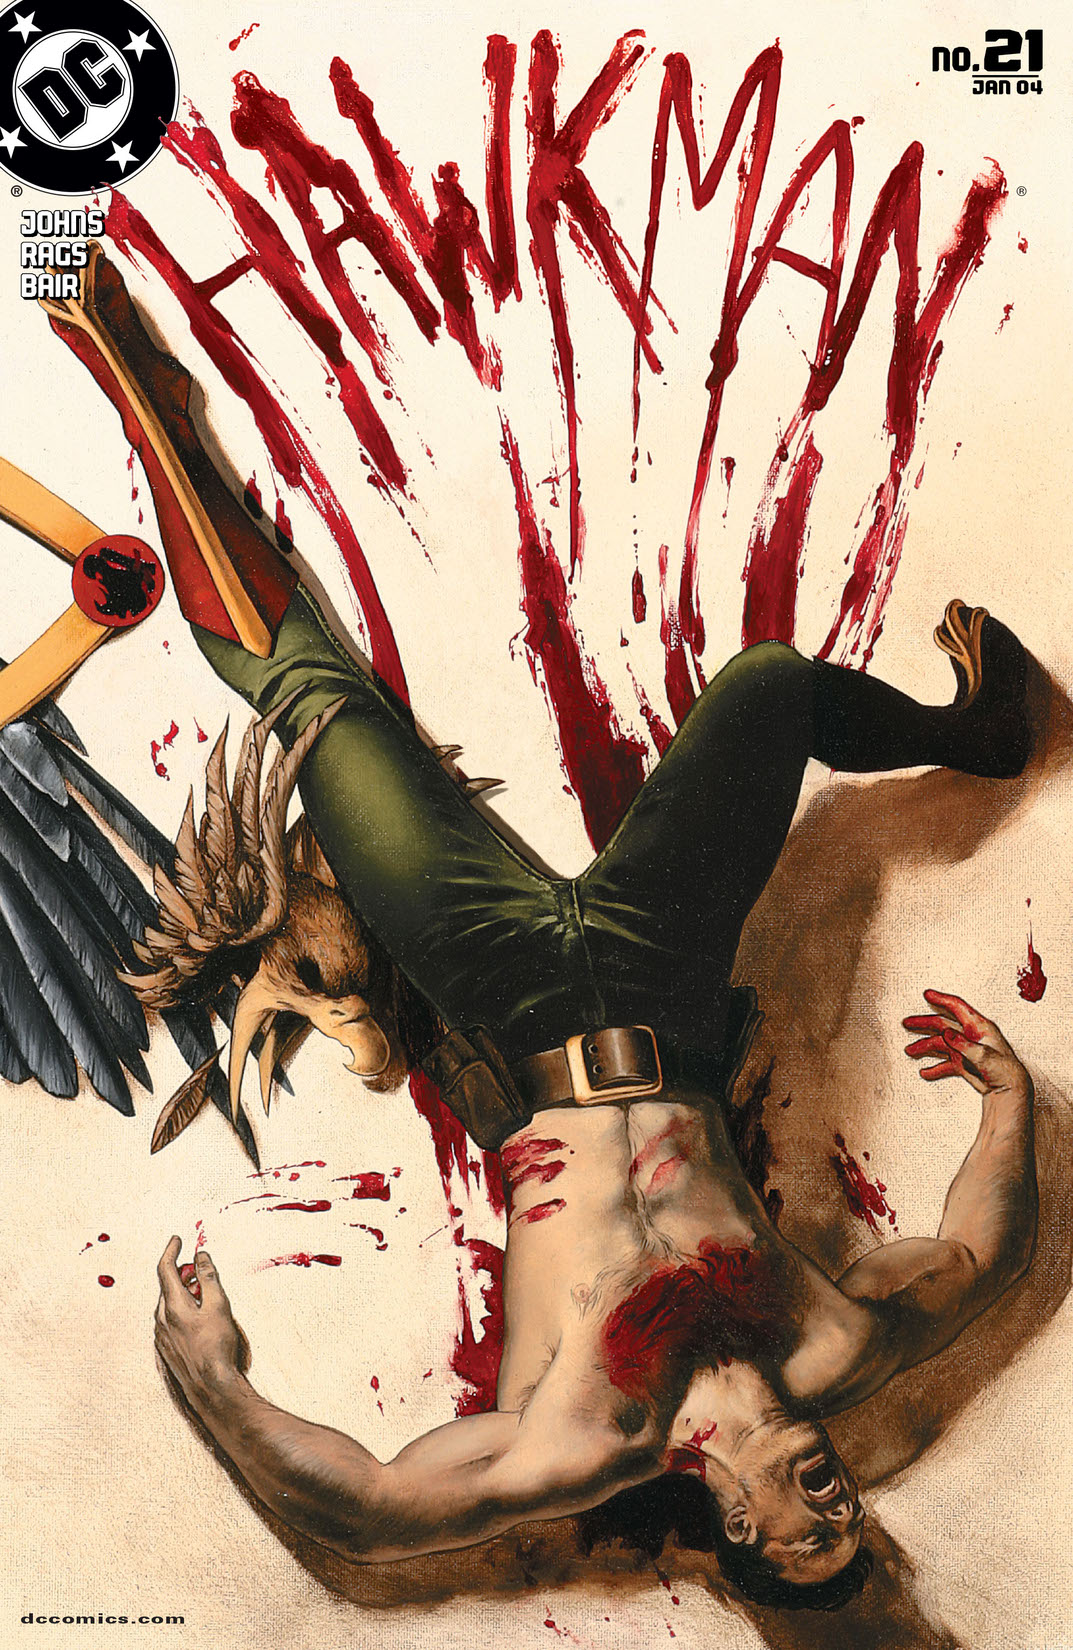 Hawkman (2002-) #21 preview images